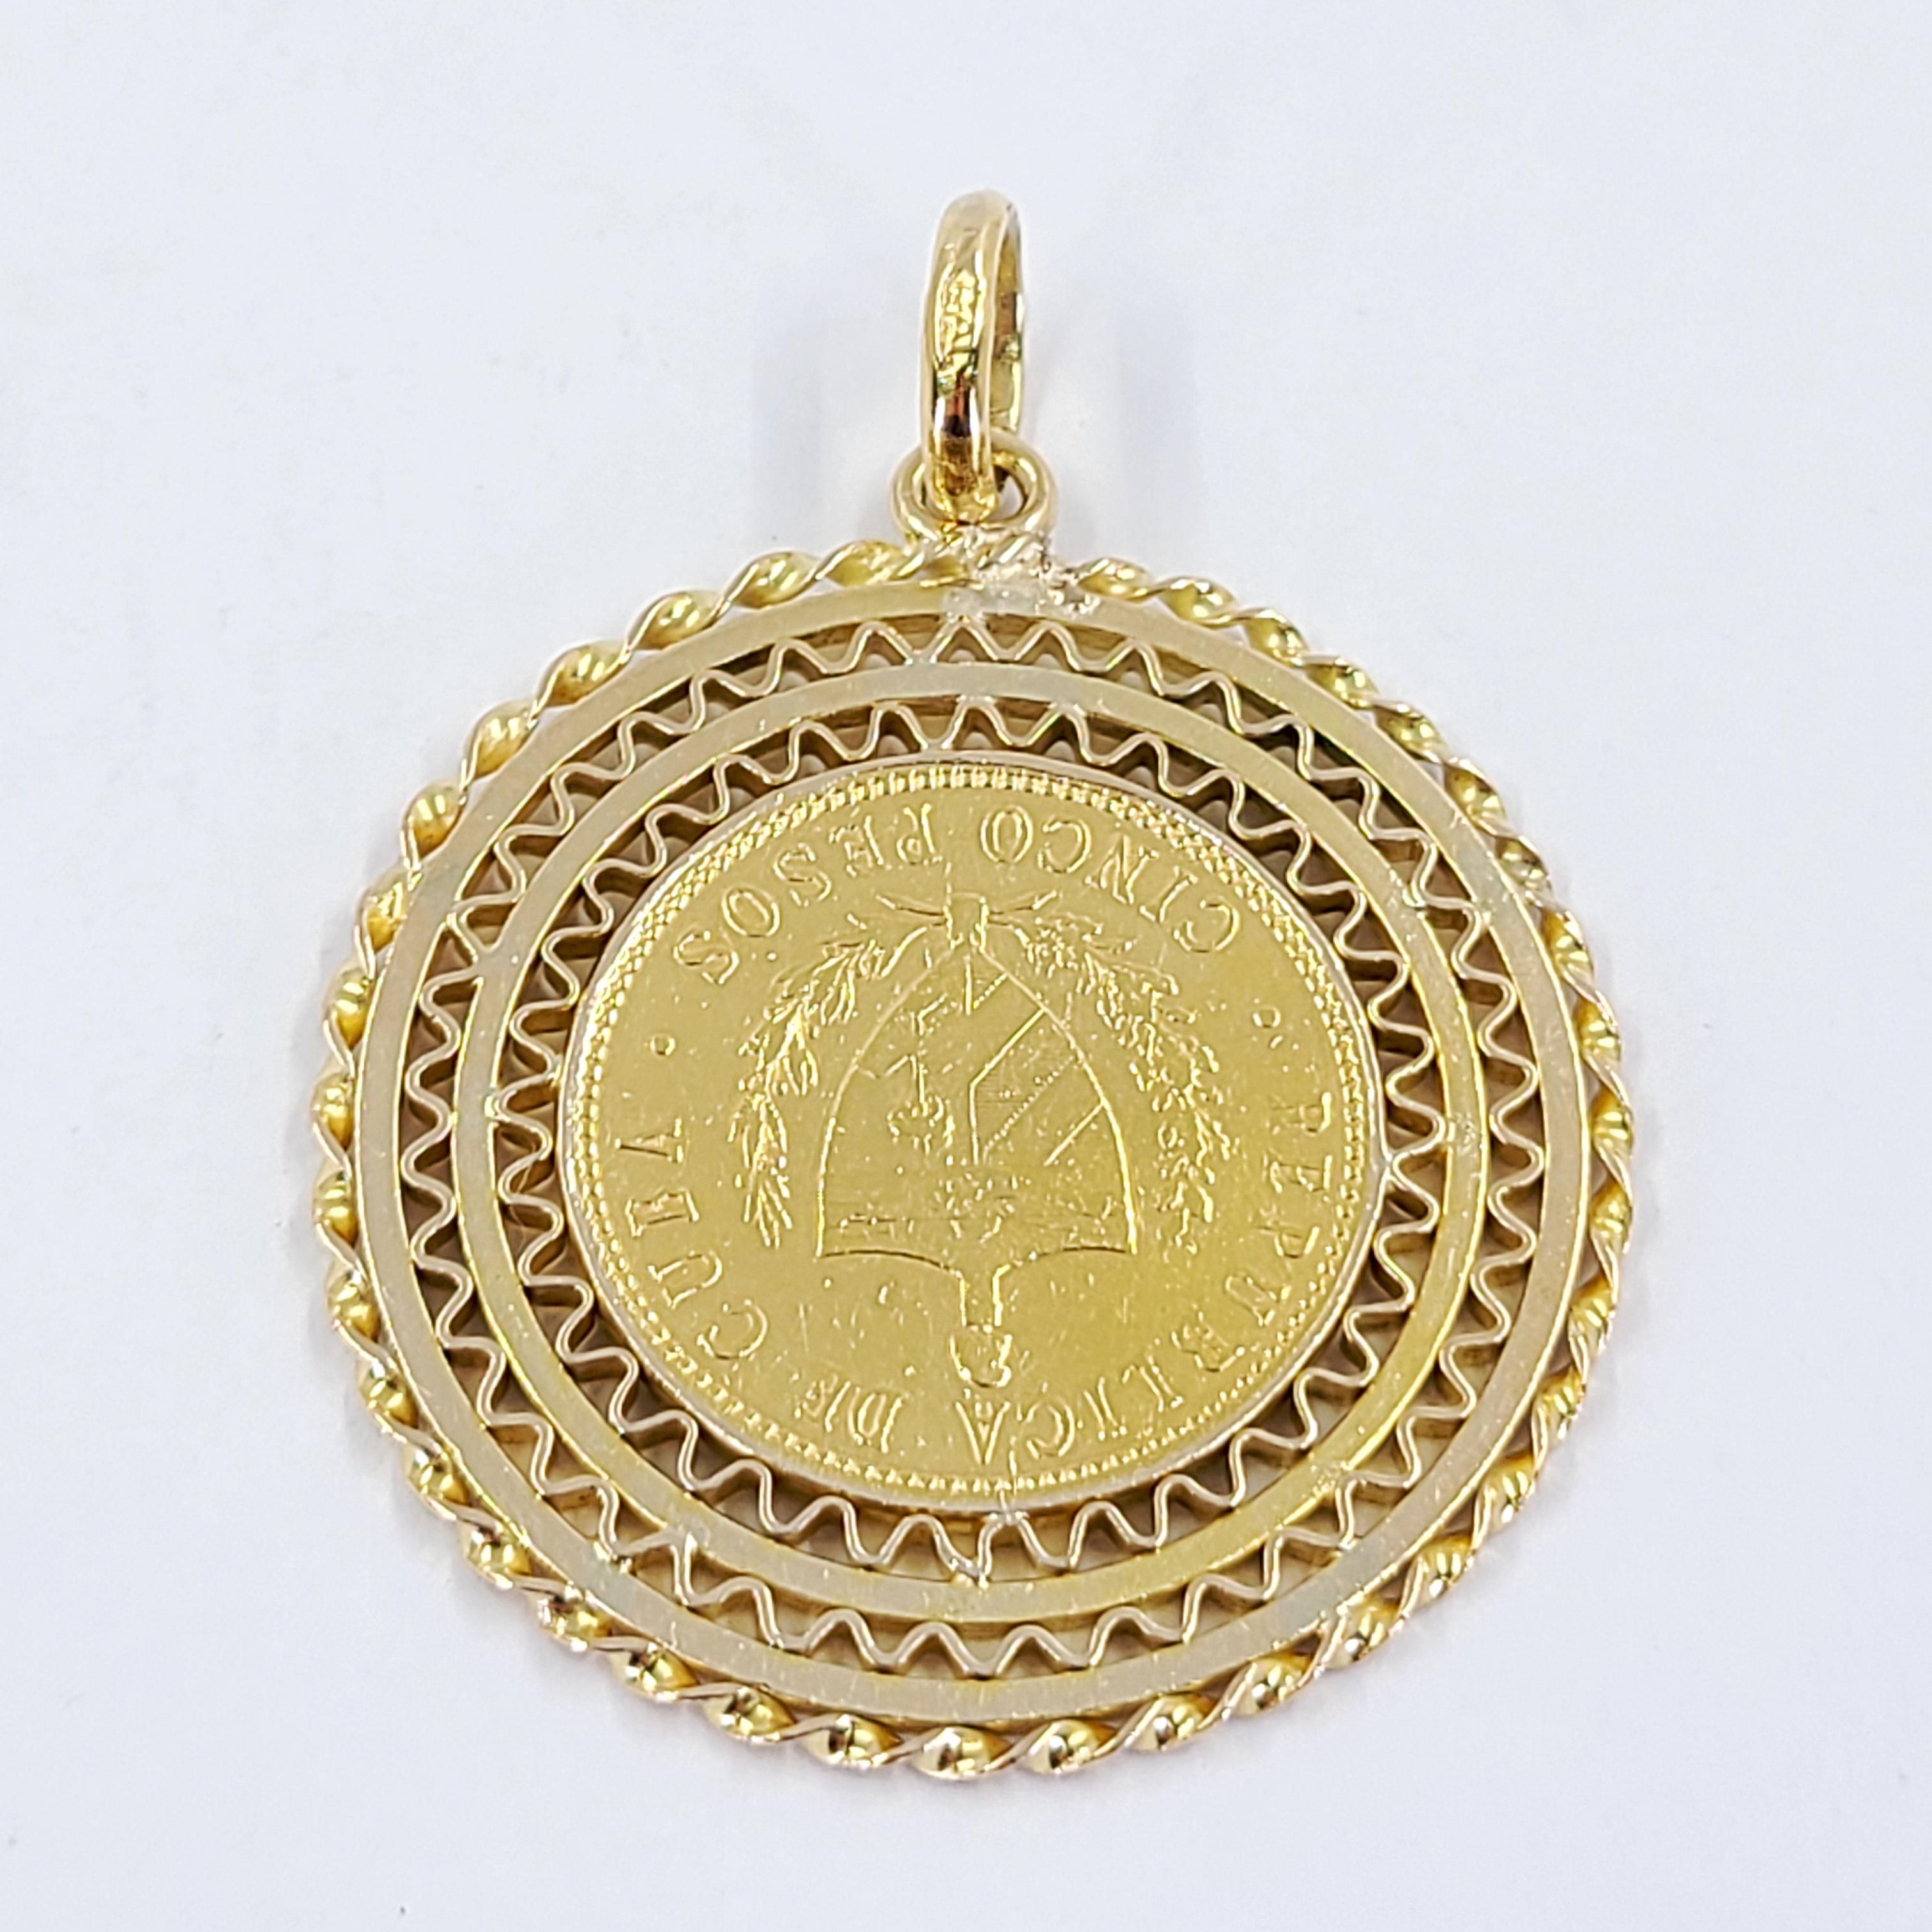 22 Karat Yellow Gold Cuban 5 Peso Coin From 1916 Set In An Ornate 18 Karat Yellow Gold Bezel With Flexible Jump Ring Attachment To Slide Through A Chain. Finished Weight Is 14.6 Grams.